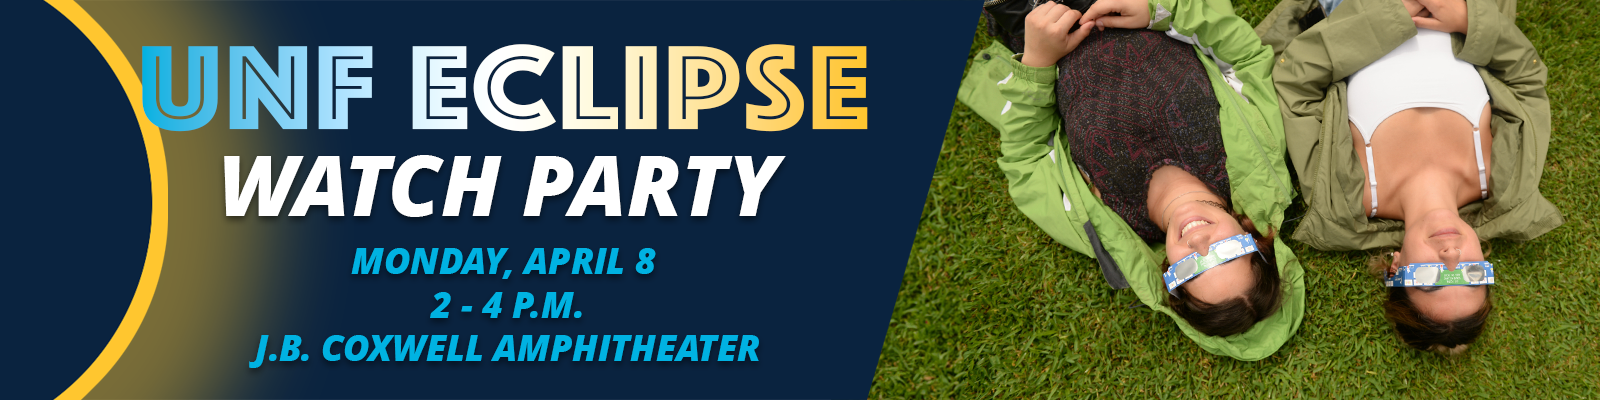 unf eclipse watch party monday april 8 2 to 4 pm jb coxwell amphitheater